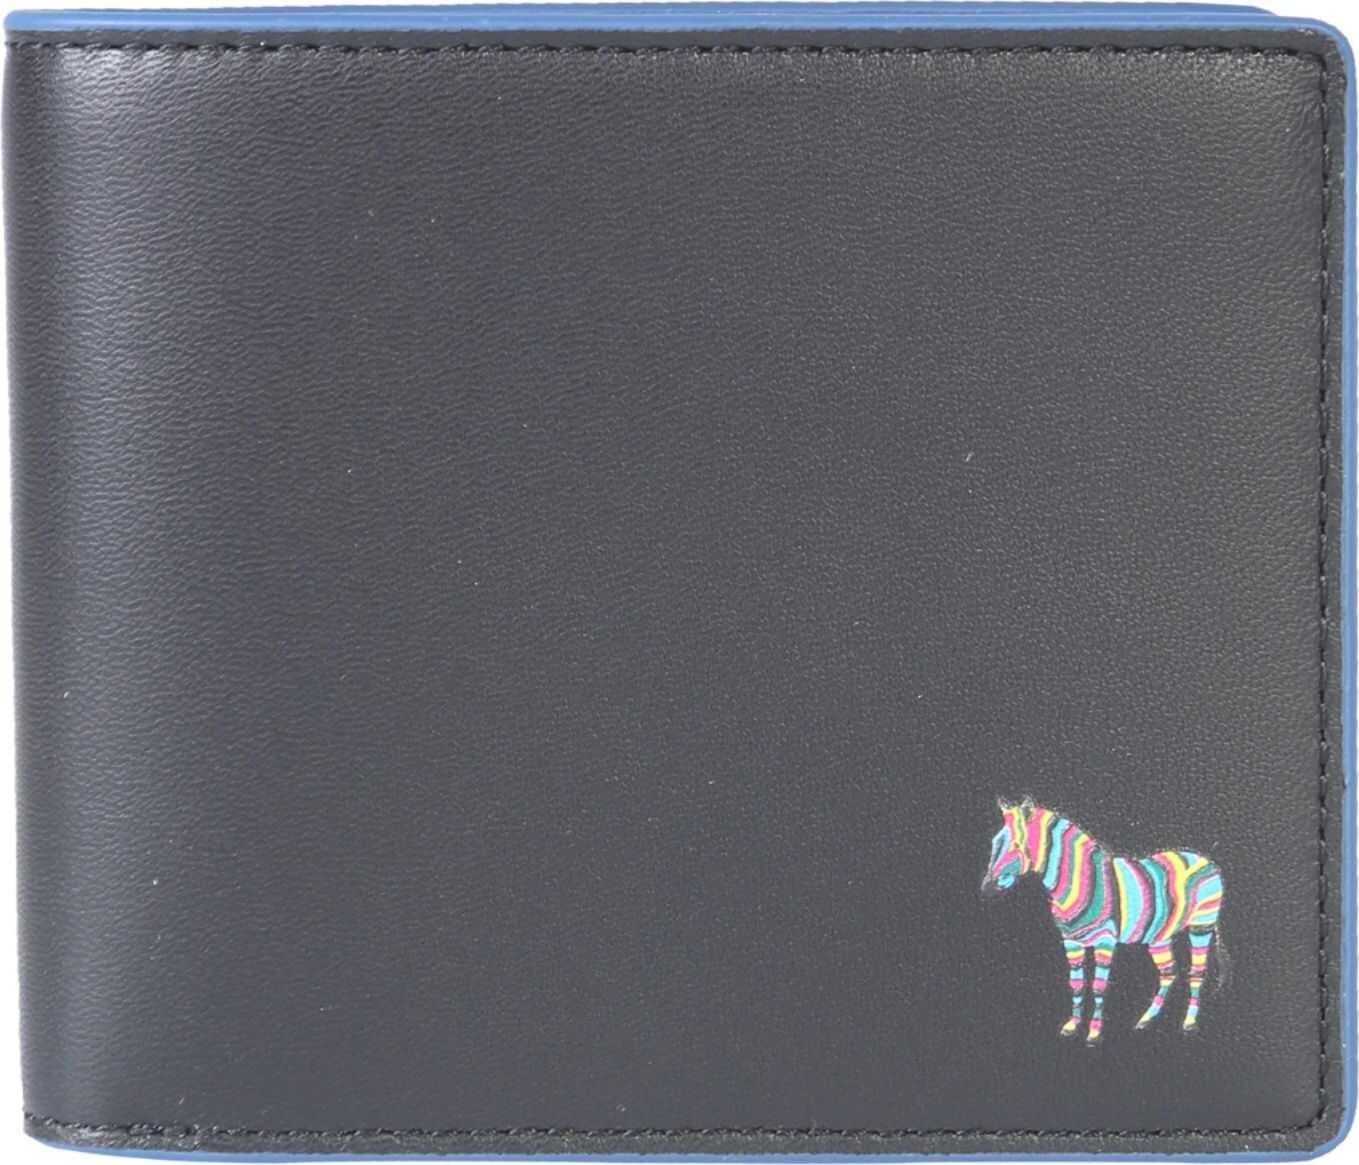 PS by Paul Smith Bifold Wallet BLACK